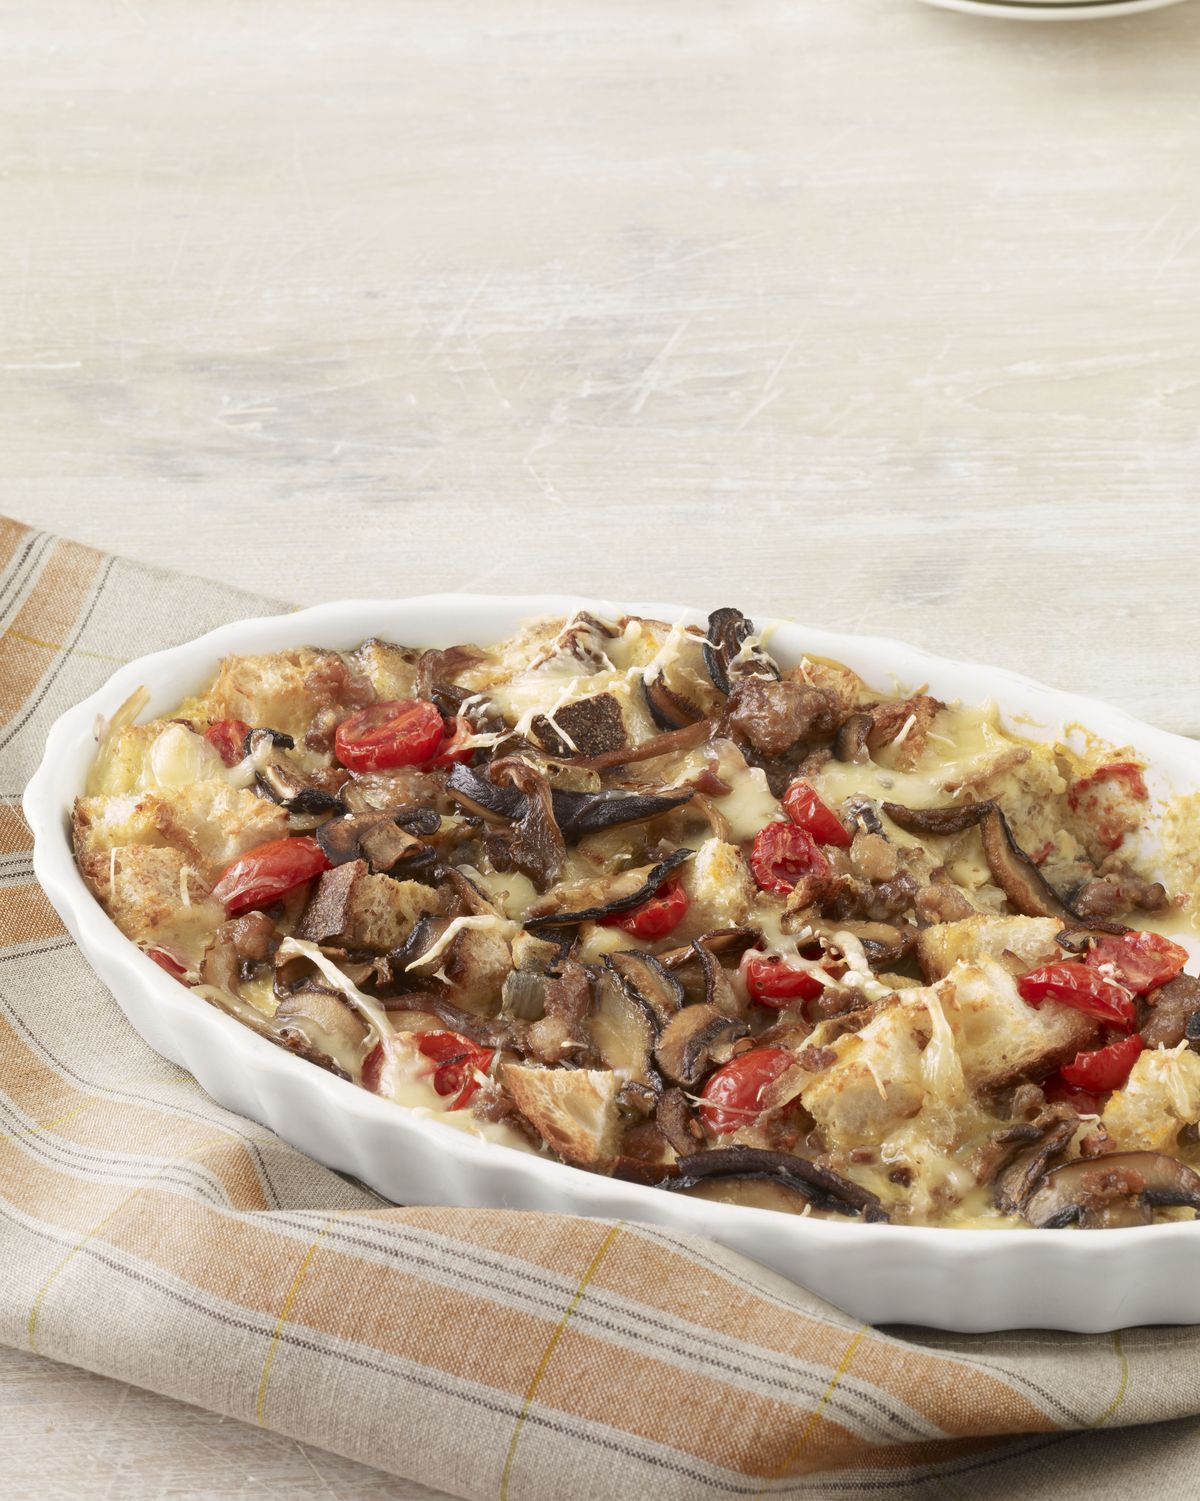 breakfast casserole with turkey sausage, mushrooms, and tomatoes